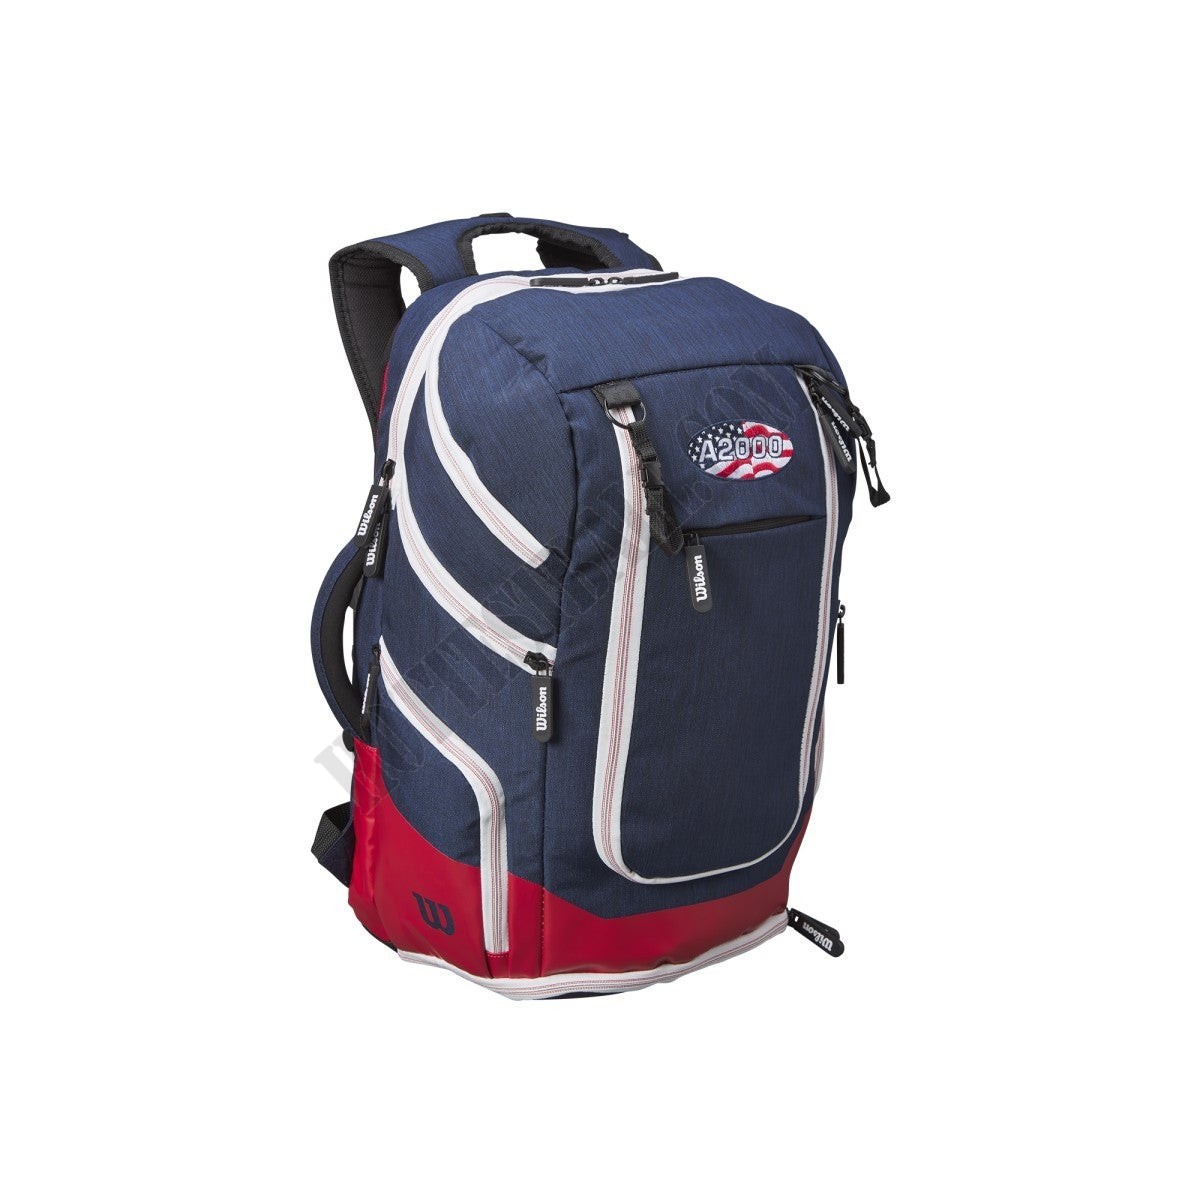 Wilson A2000 Backpack - Wilson Discount Store - -18